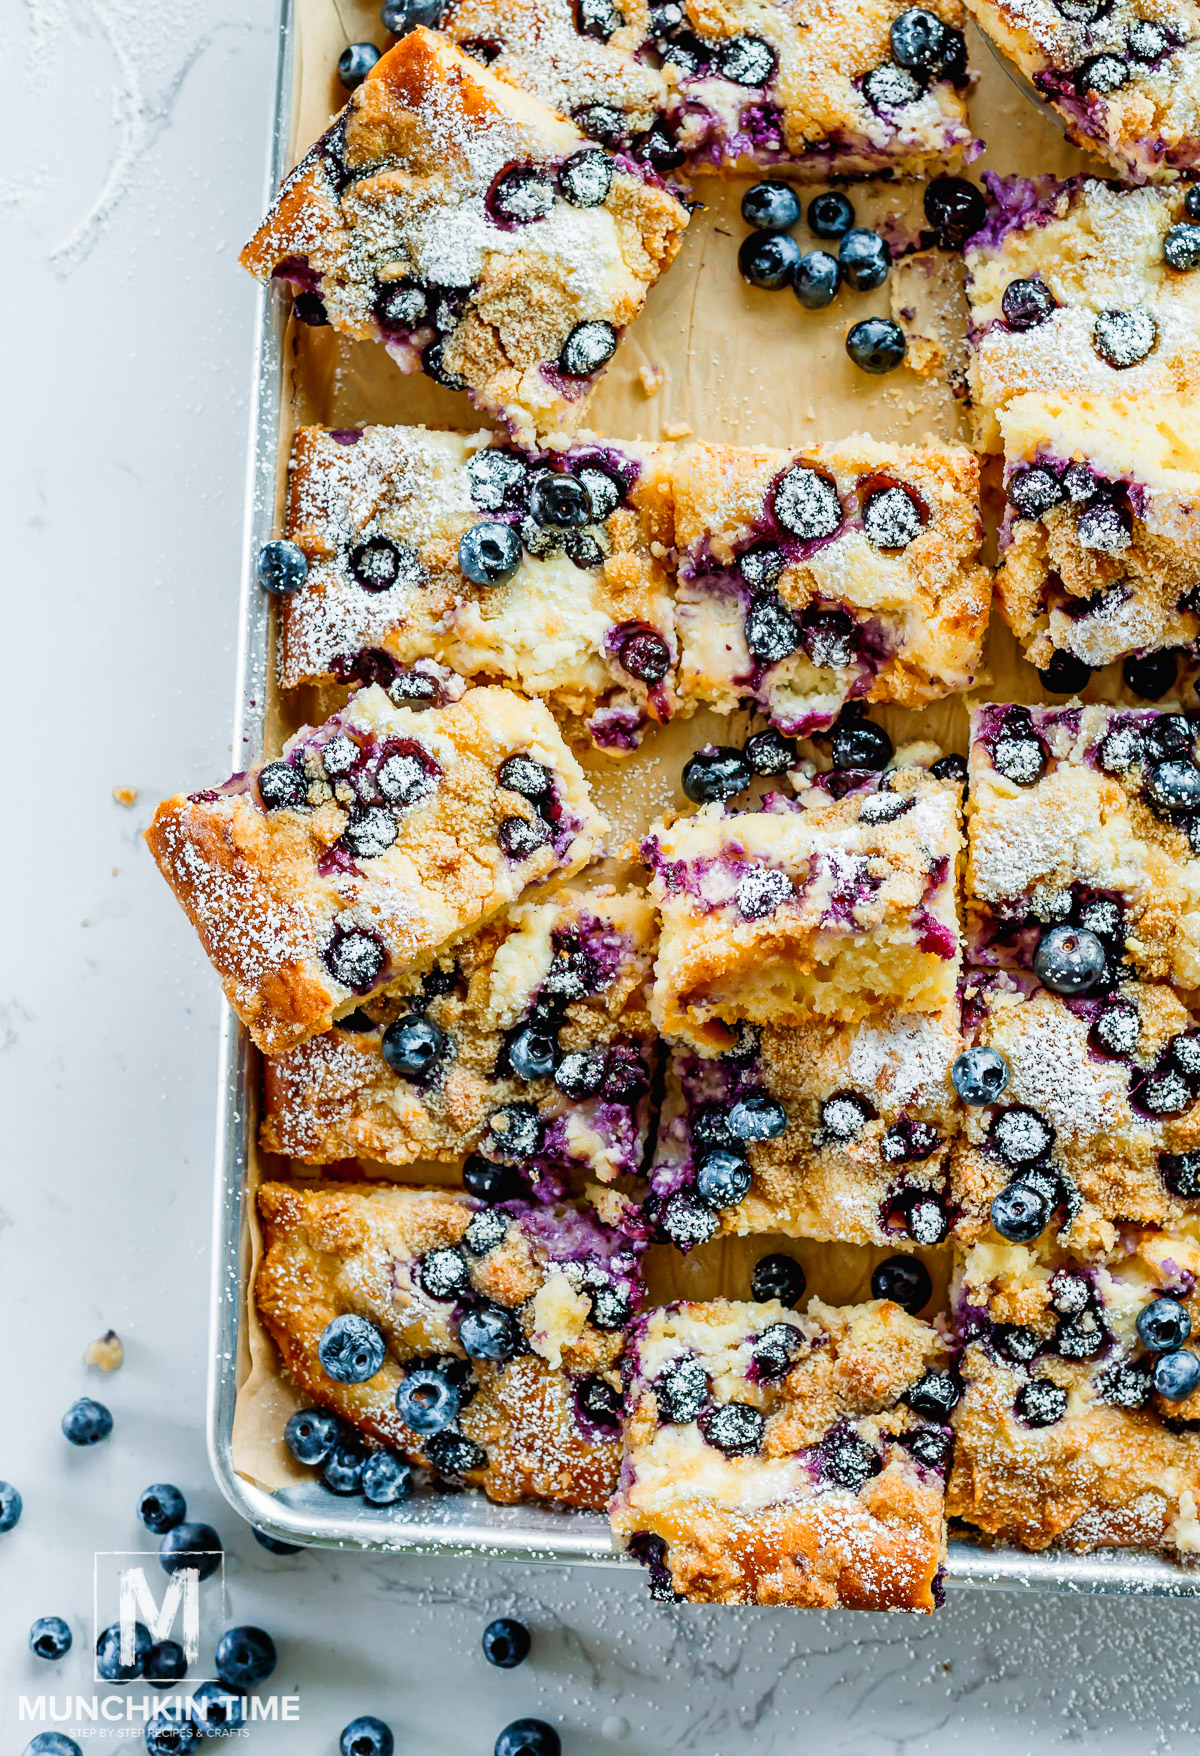 What to Serve with Blueberry Cake